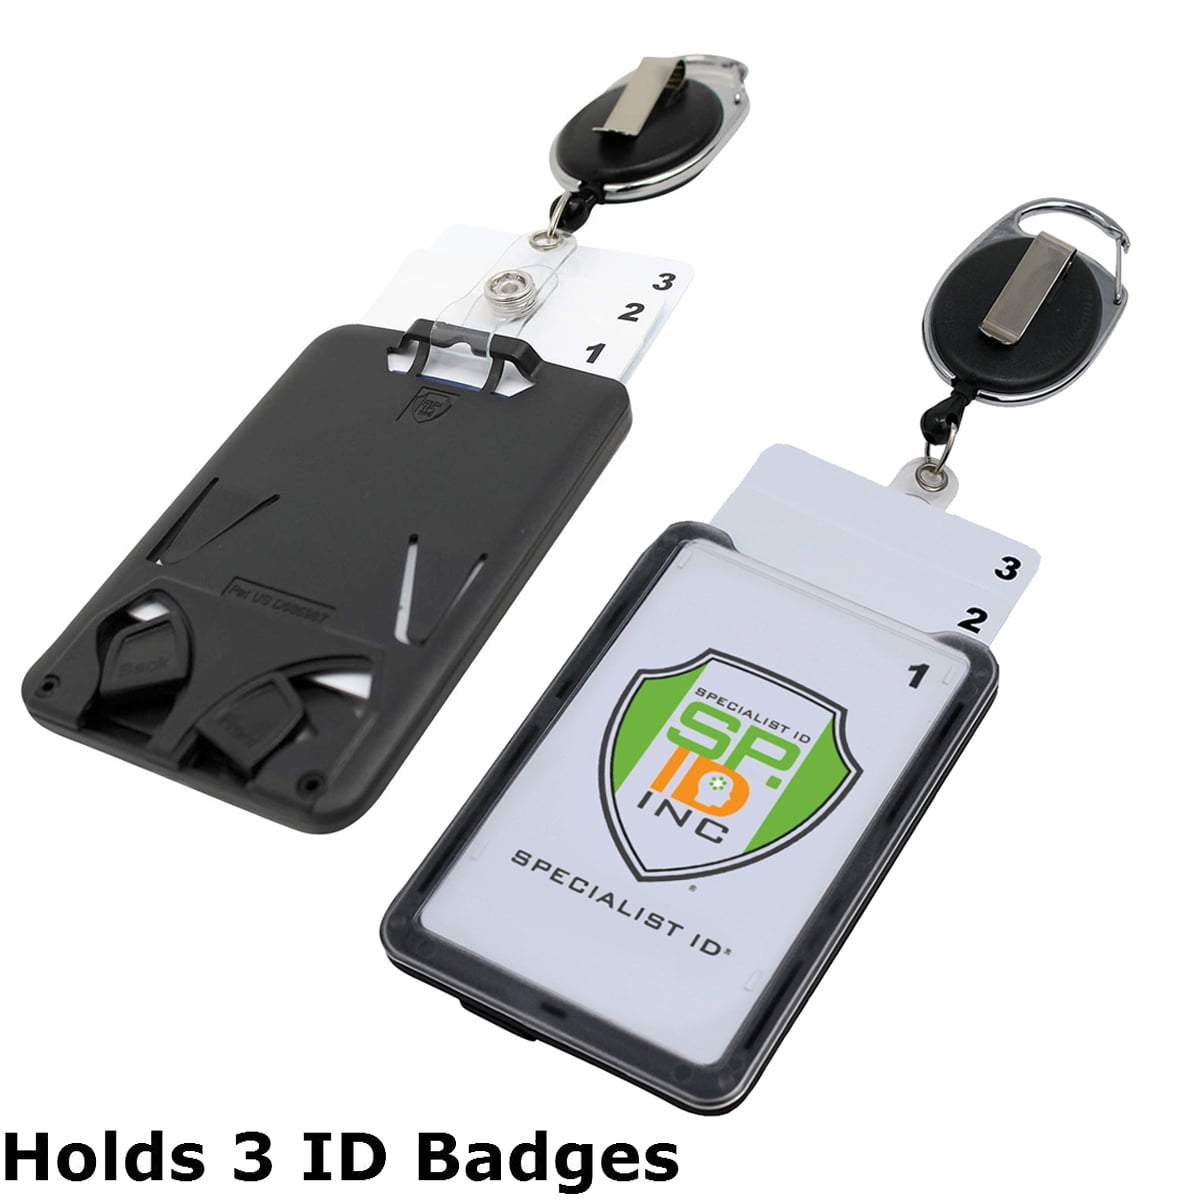 Hard Plastic 3 Card Badge Holder with Retractable Reel - Retracting ID  Lanyard Features Belt Clip  Carabiner - Rigid Vertical CAC Holder - Top  Load Holds Three Cards by Specialist ID (Black) - Walmart.com